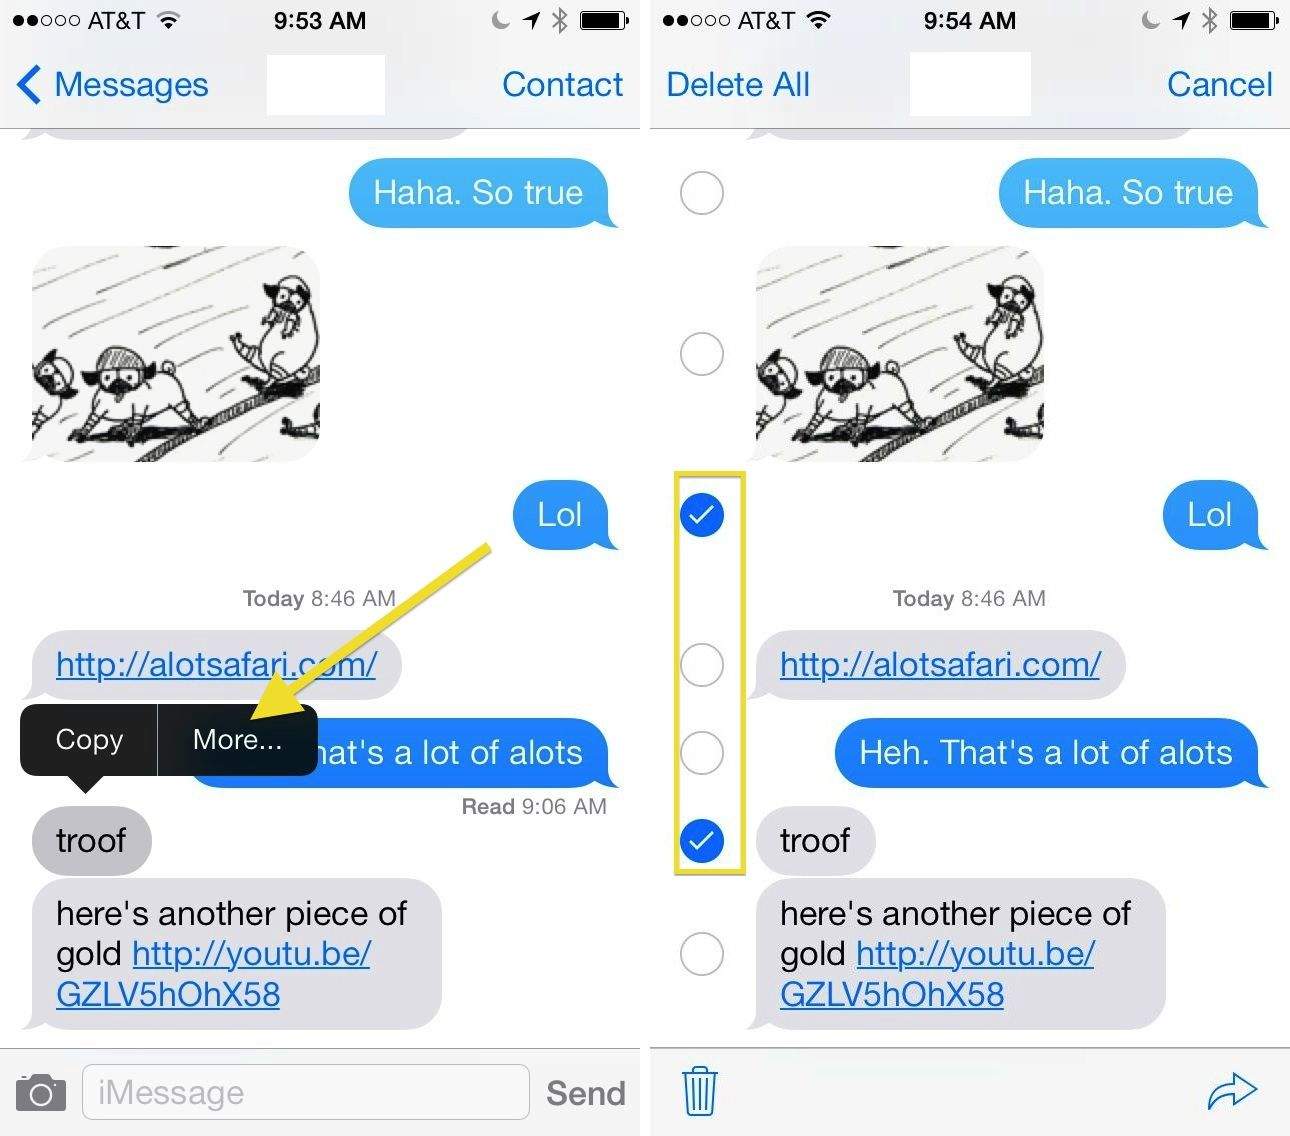 How To Delete Text Messages From Your iPhone In iOS 7 [iOS Tips] | Cult